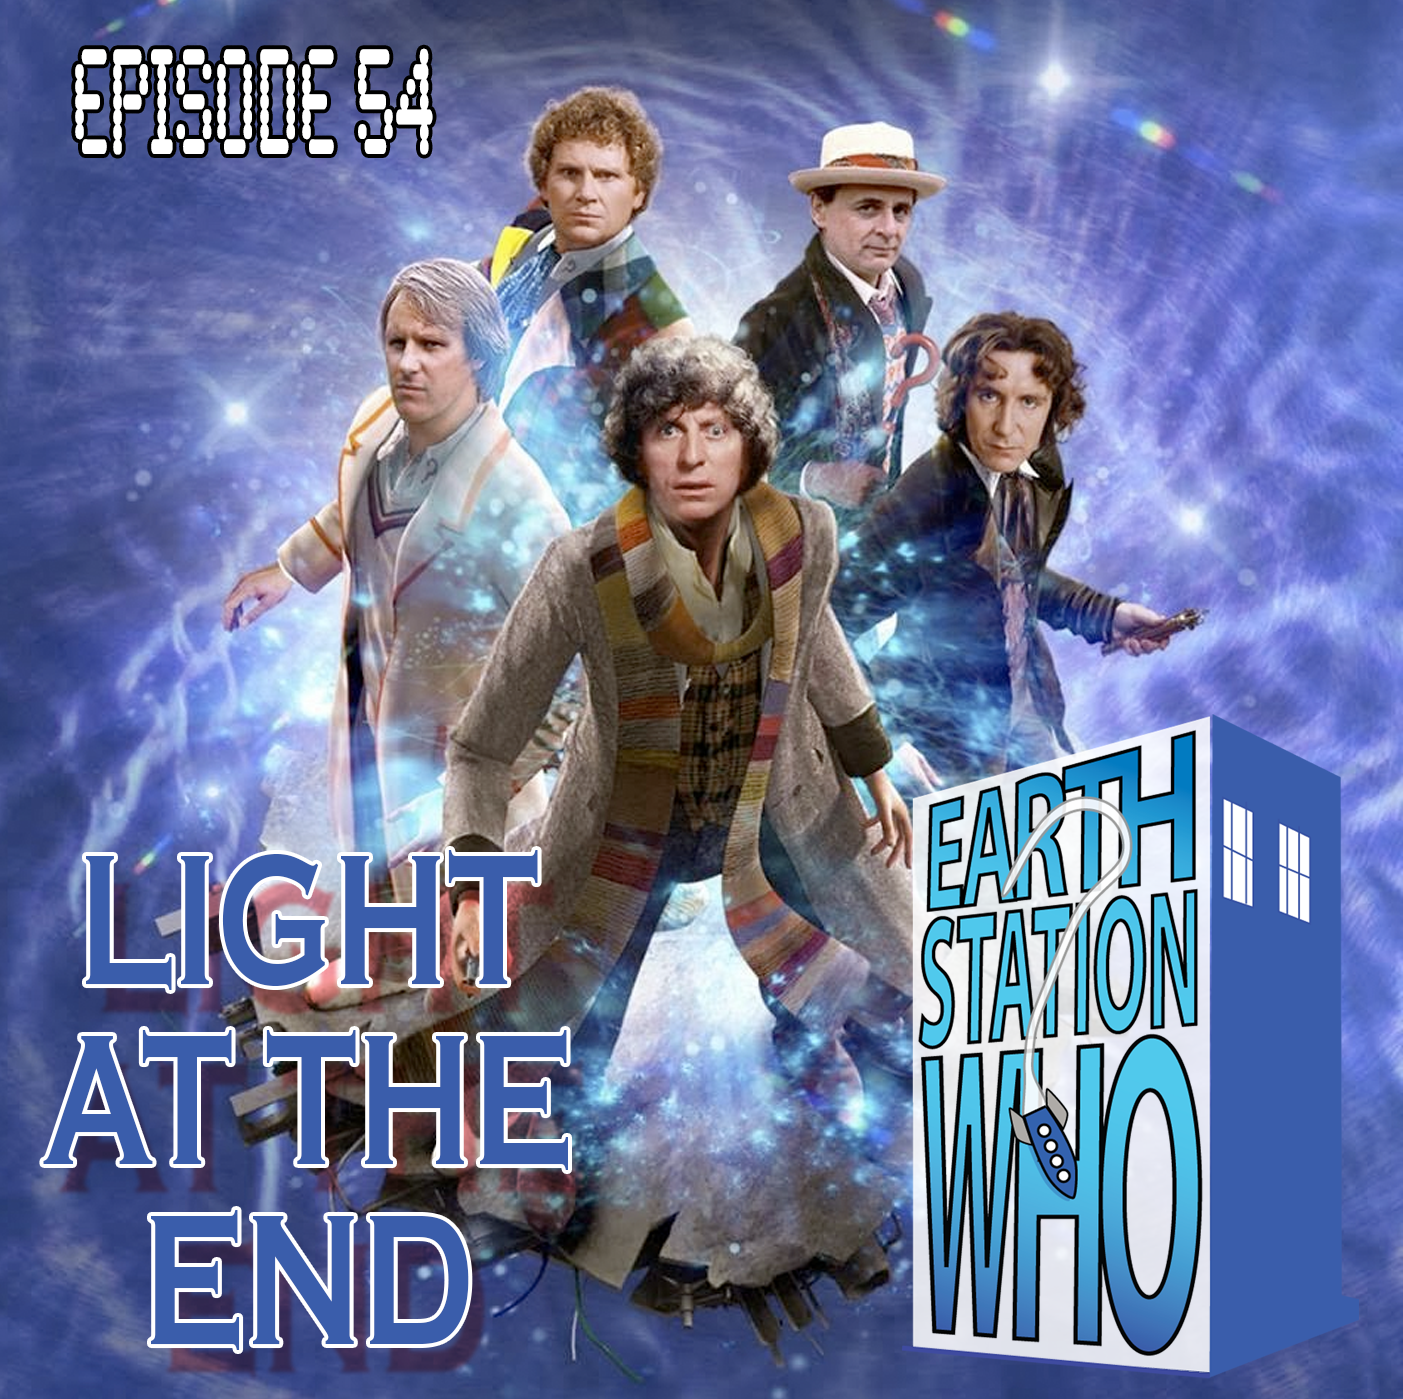 Earth Station Who Ep 83